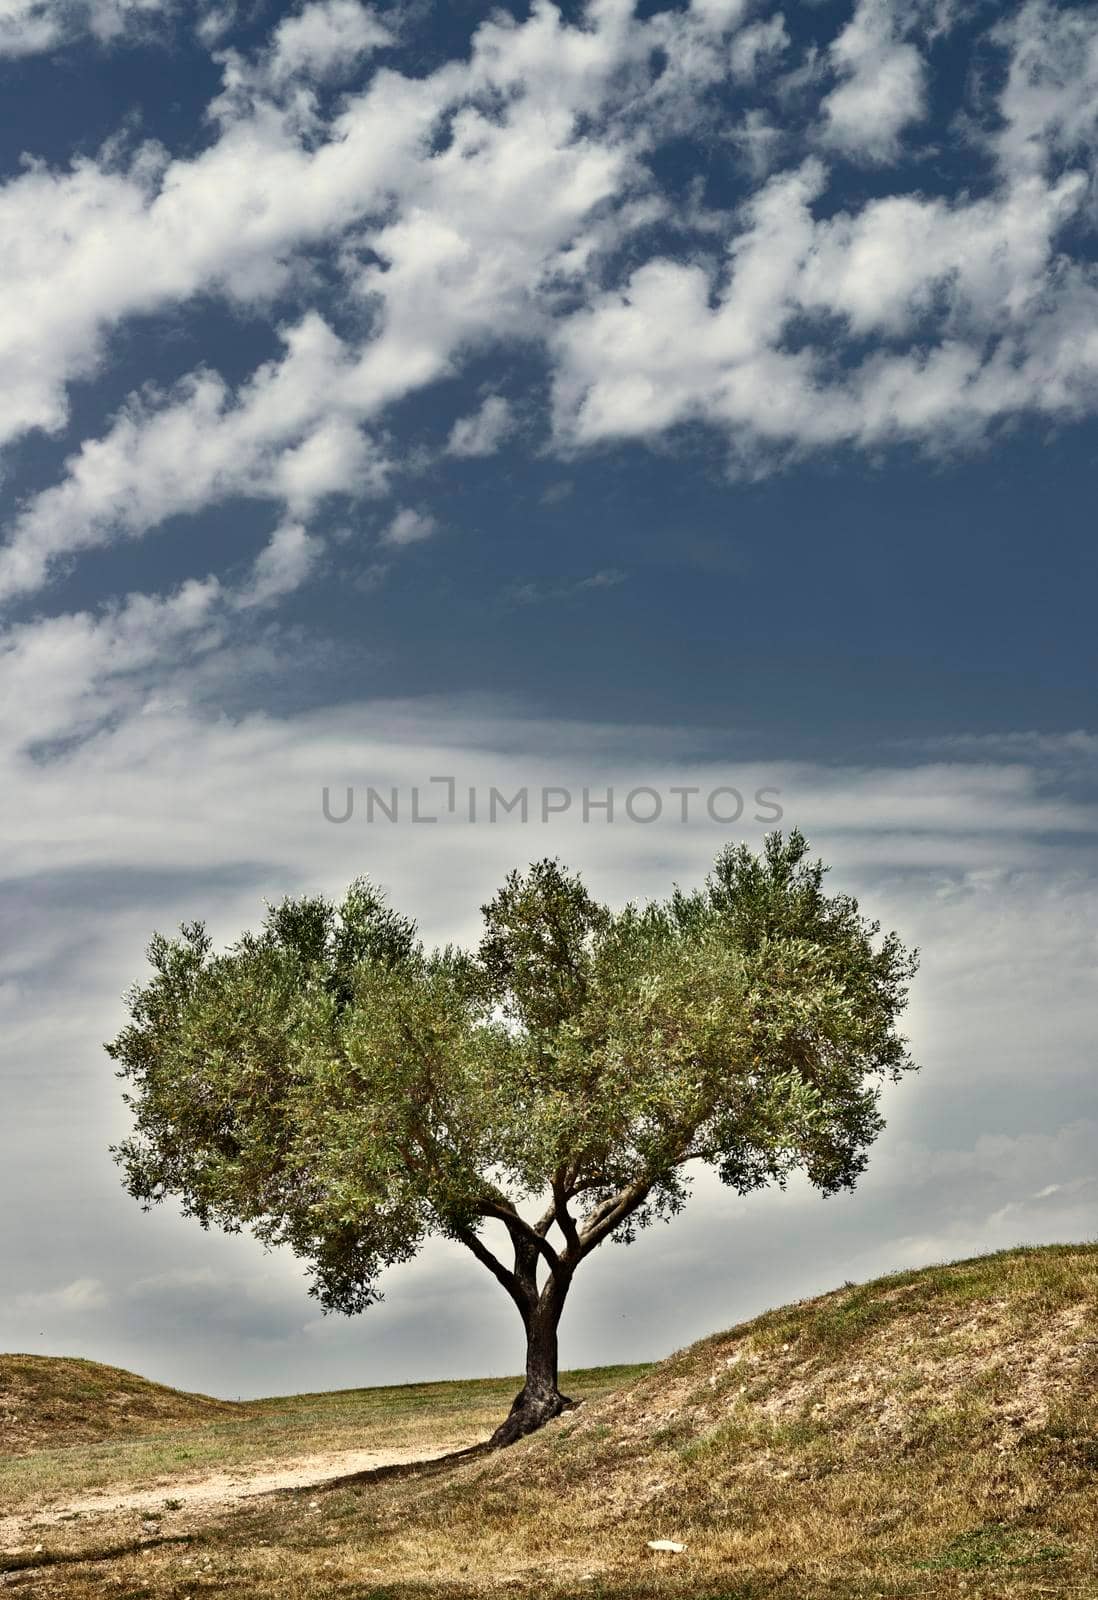 Olive tree on a barren land with hills ,beautiful blue and cloudy sky in a bright sunny day ,Italian landscape